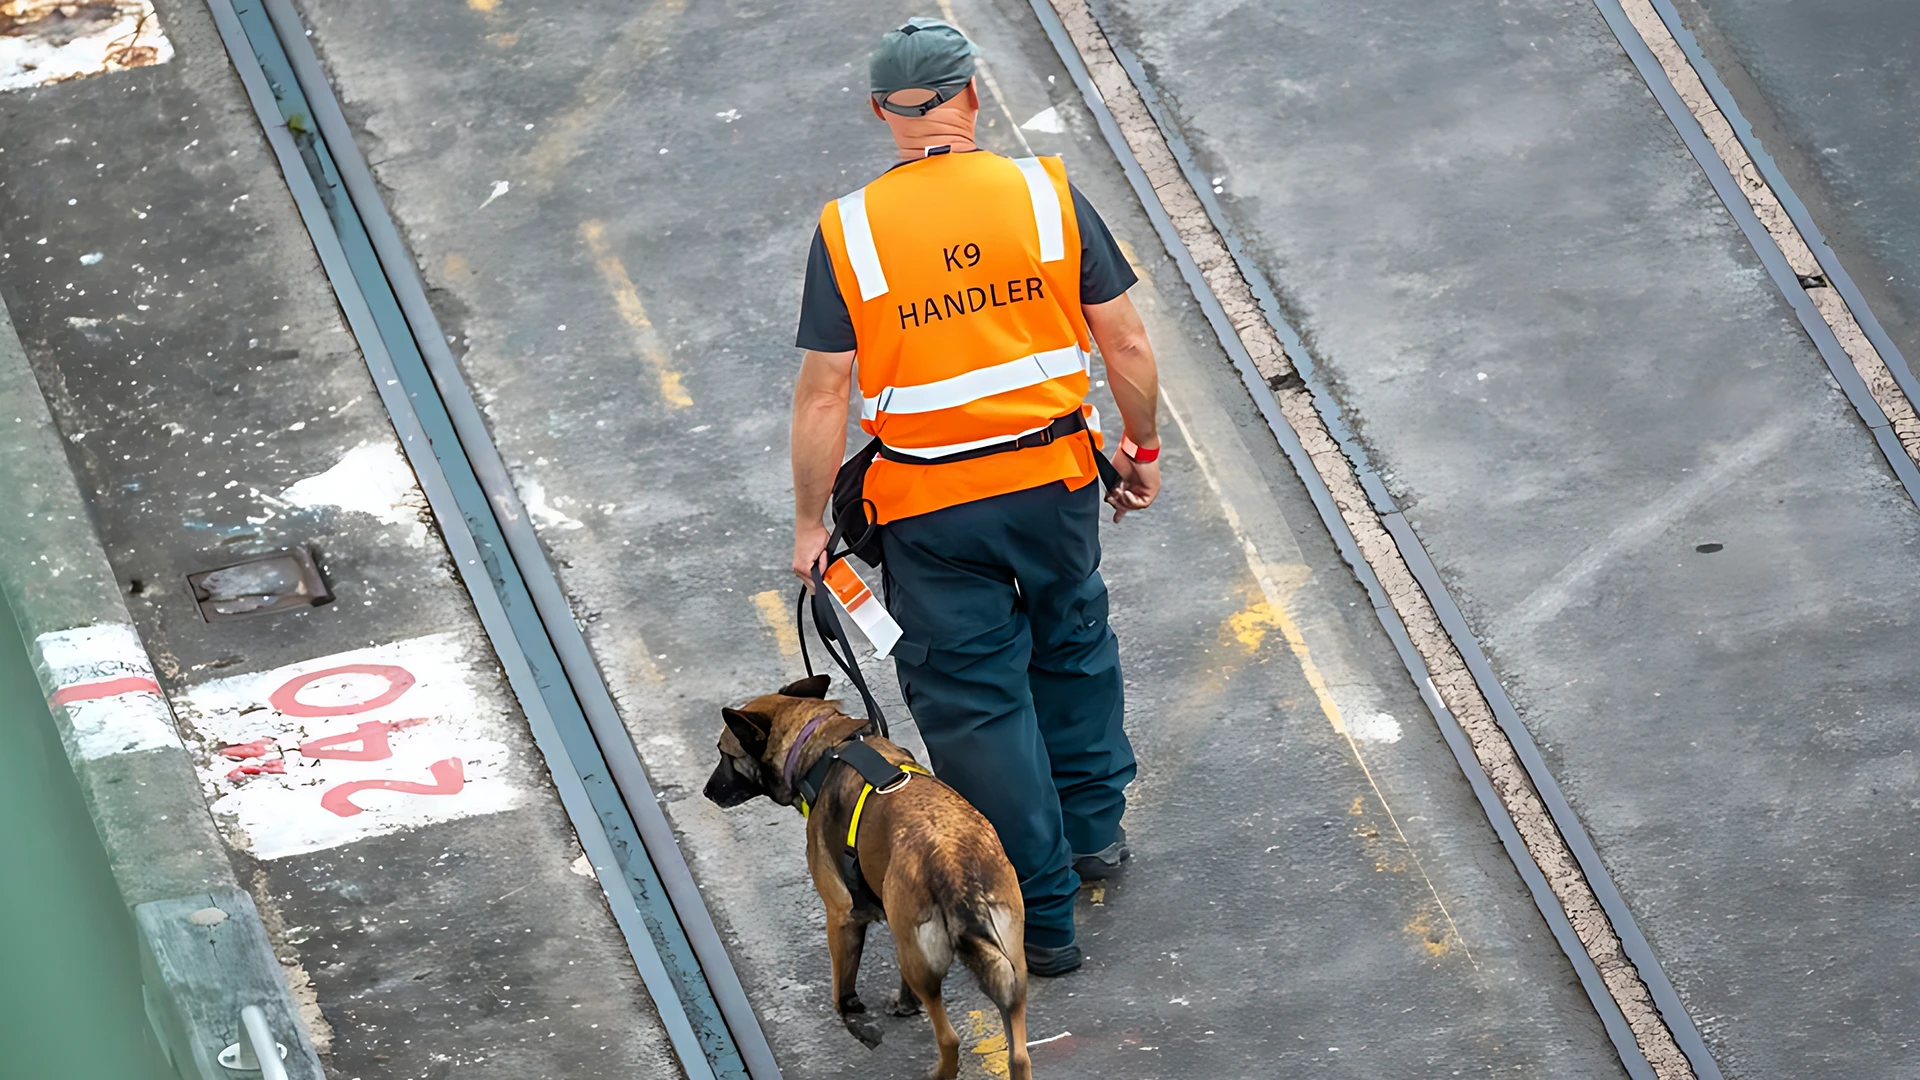 K9 security guard, in Guard Mark uniform, uses watchdog to prevent criminal activity as instructed.